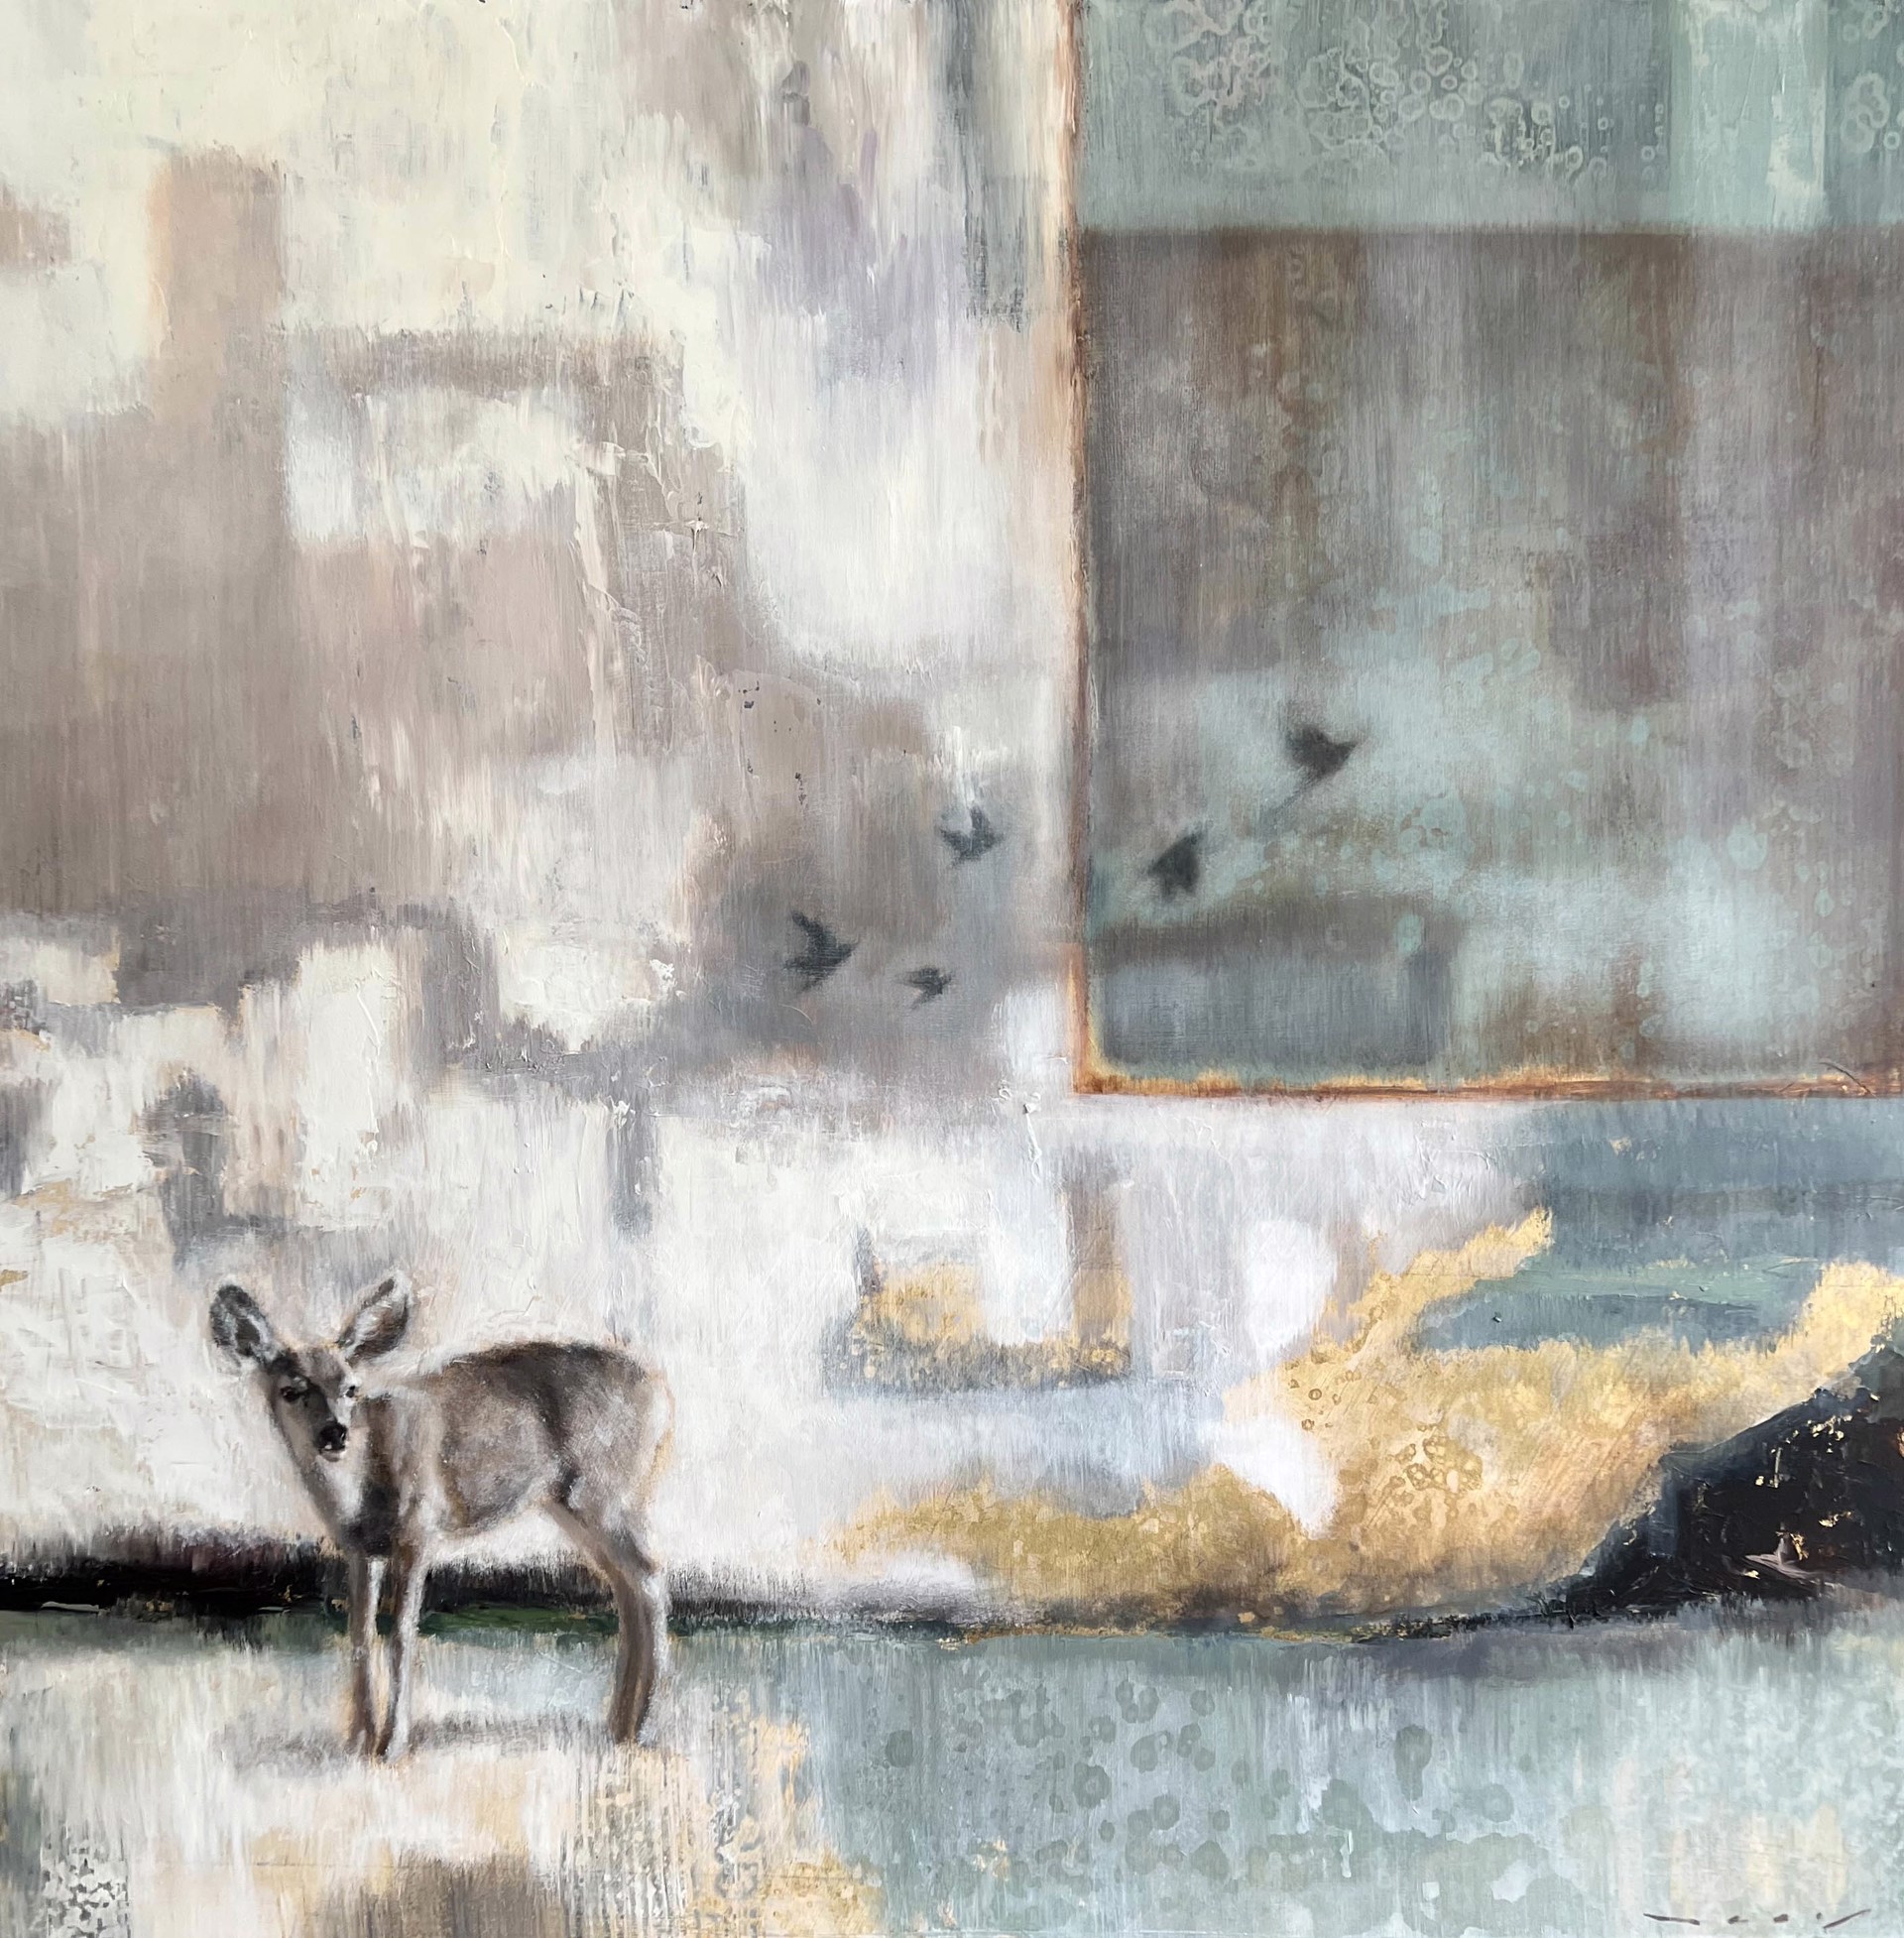 Original Mixed Media Painting By Nealy Riley Featuring A Deer Over Abstract Background